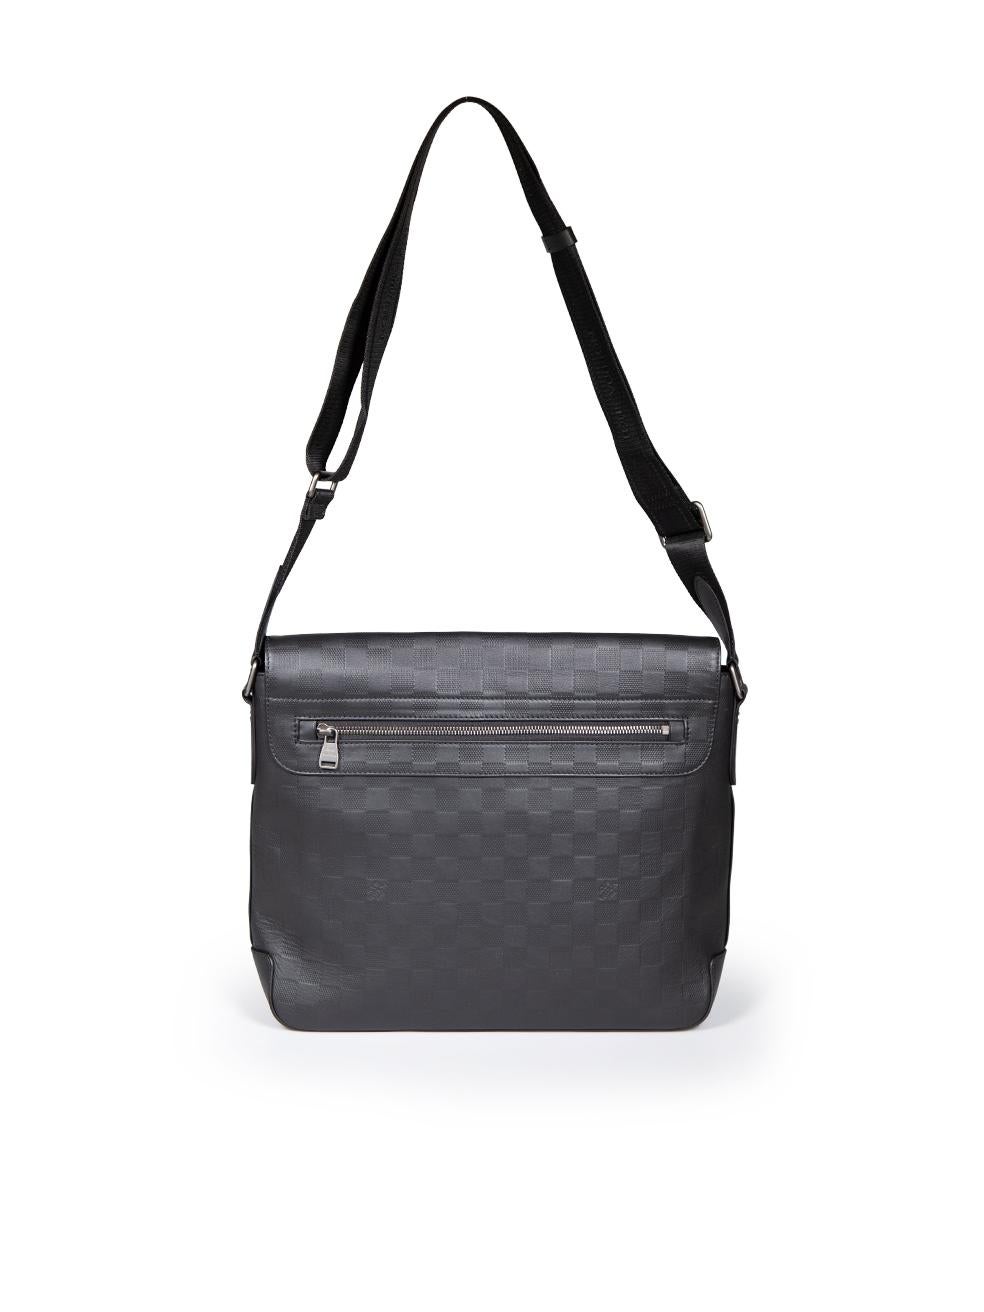 Louis Vuitton 2016 Black Onyx Damier Infini District MM Bag In Excellent Condition In London, GB